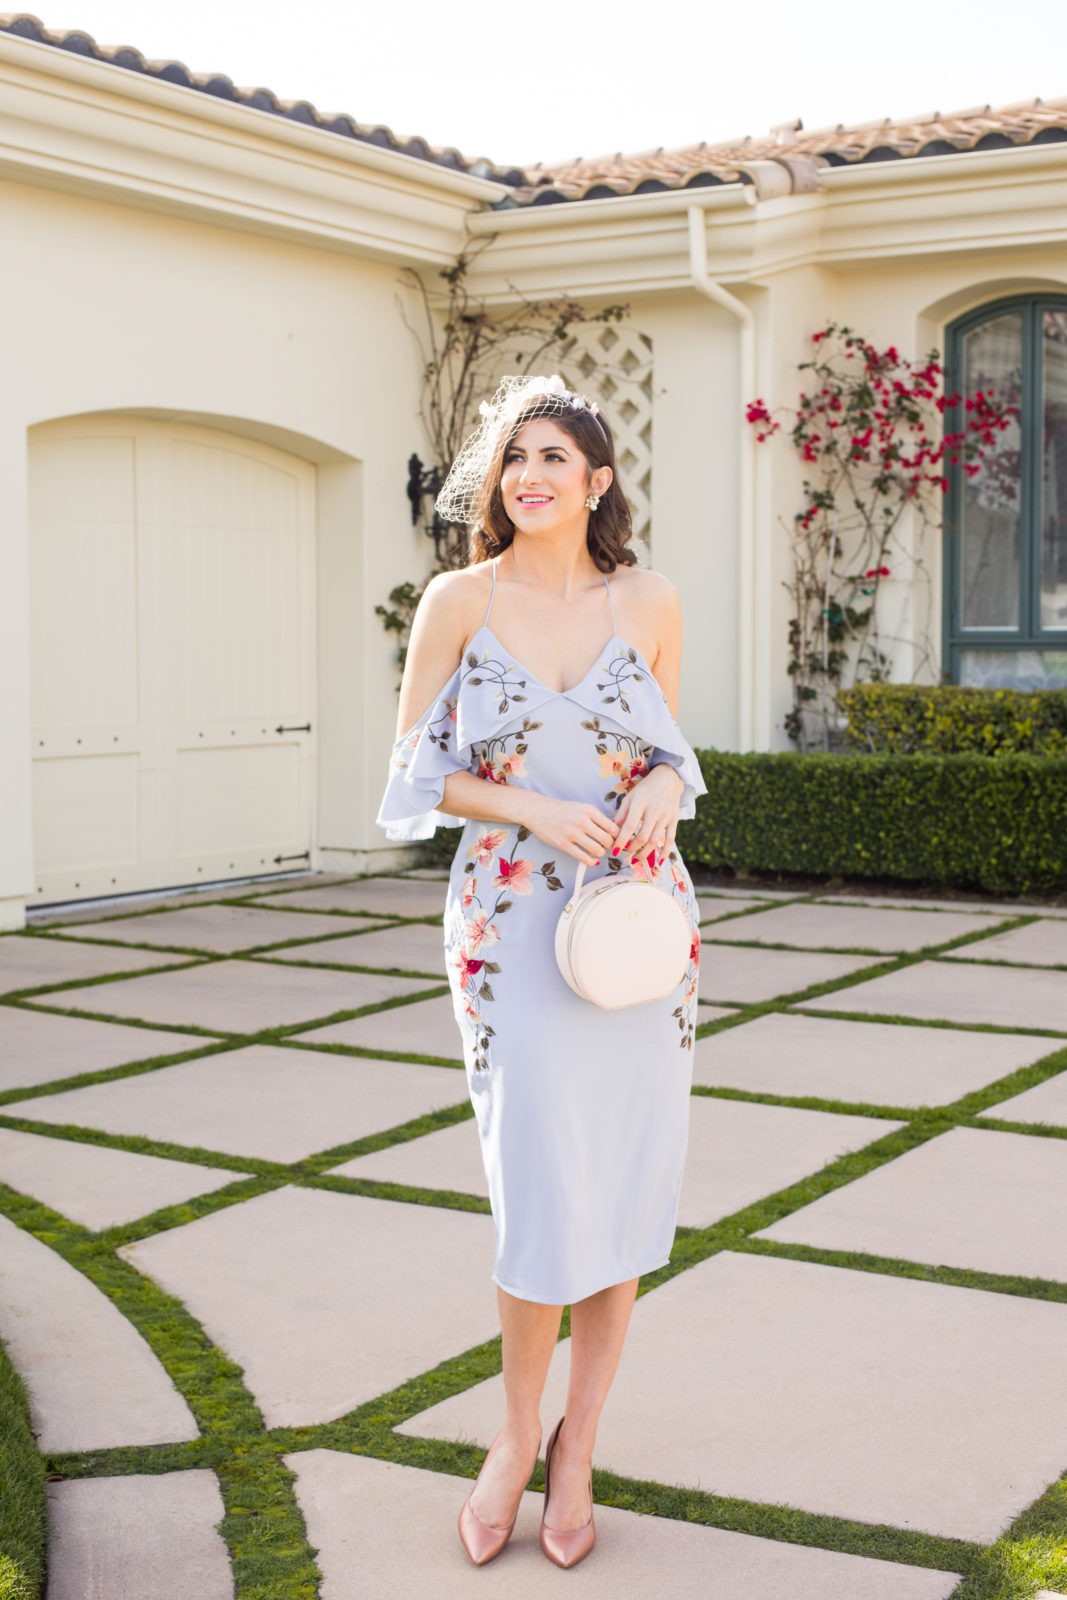 Wedding Guest Dress Options for Spring - Loverly Grey